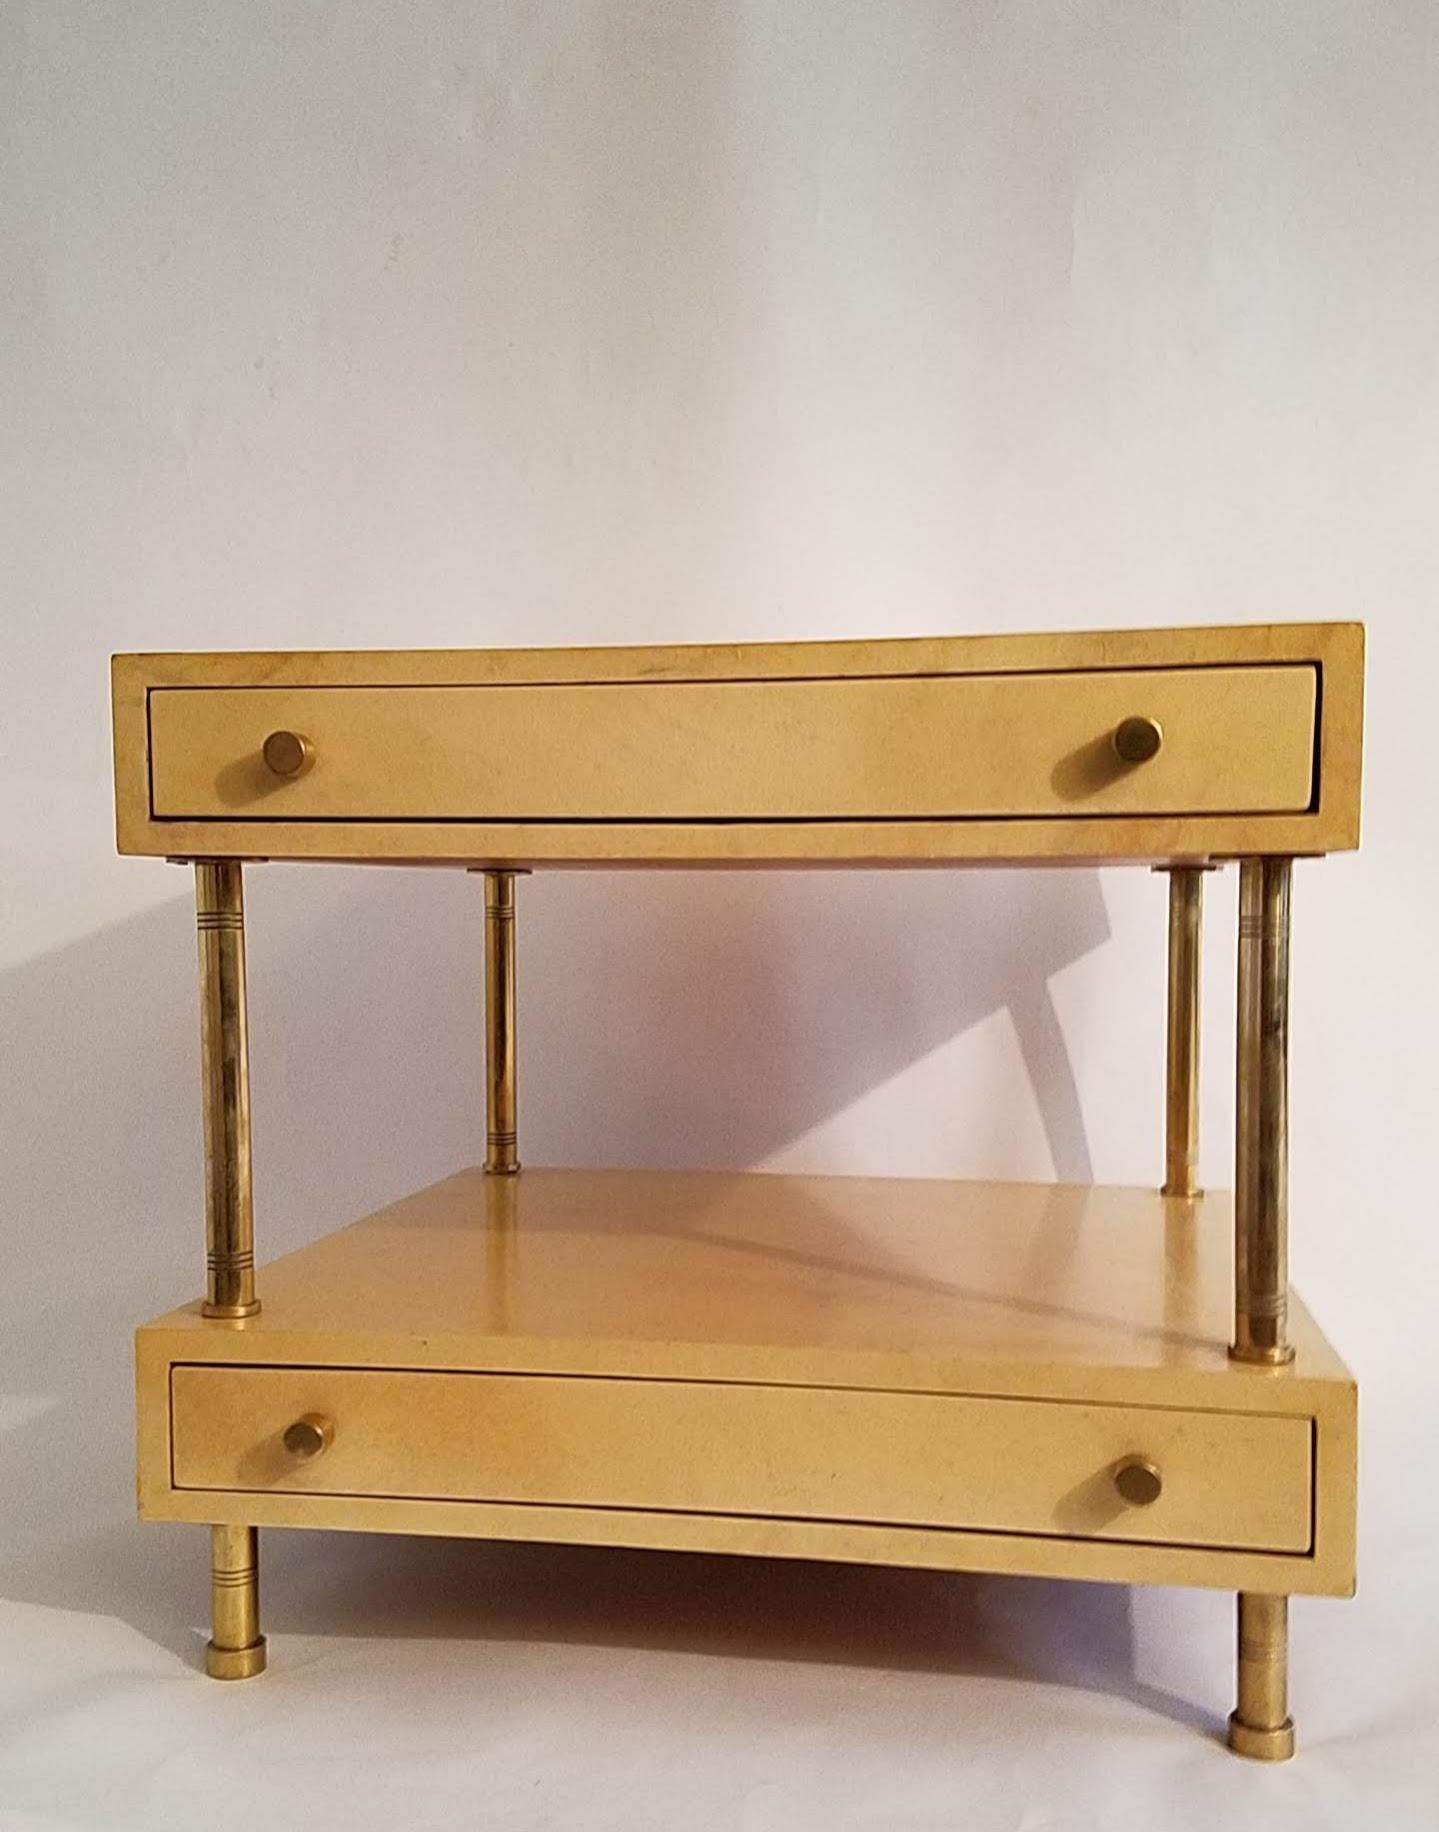 Aldo Tura 2 drawer nightstand or end table cased in parchment on polished brass legs.
Created in Milan, Italy in the 1950s.
Excellent vintage condition with wear consistent with gentle use.